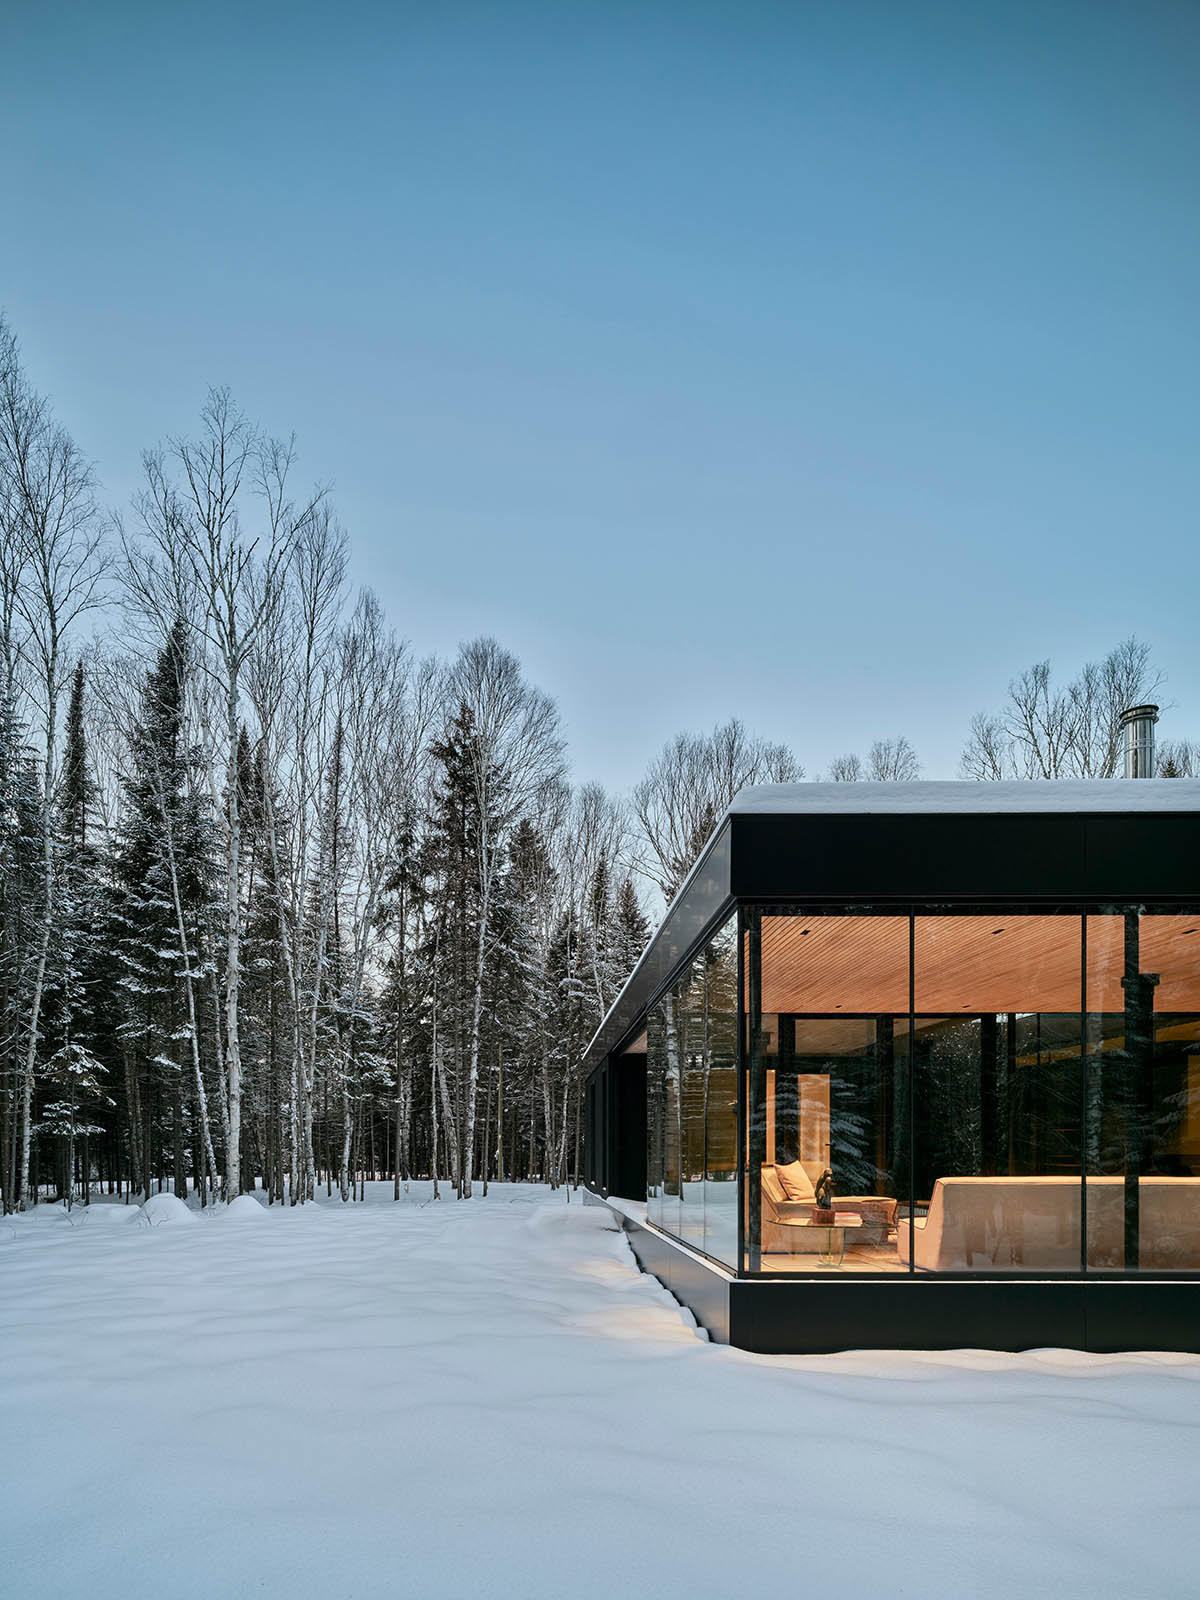 ACDF Architecture built a family glass house around an apple tree in Quebec